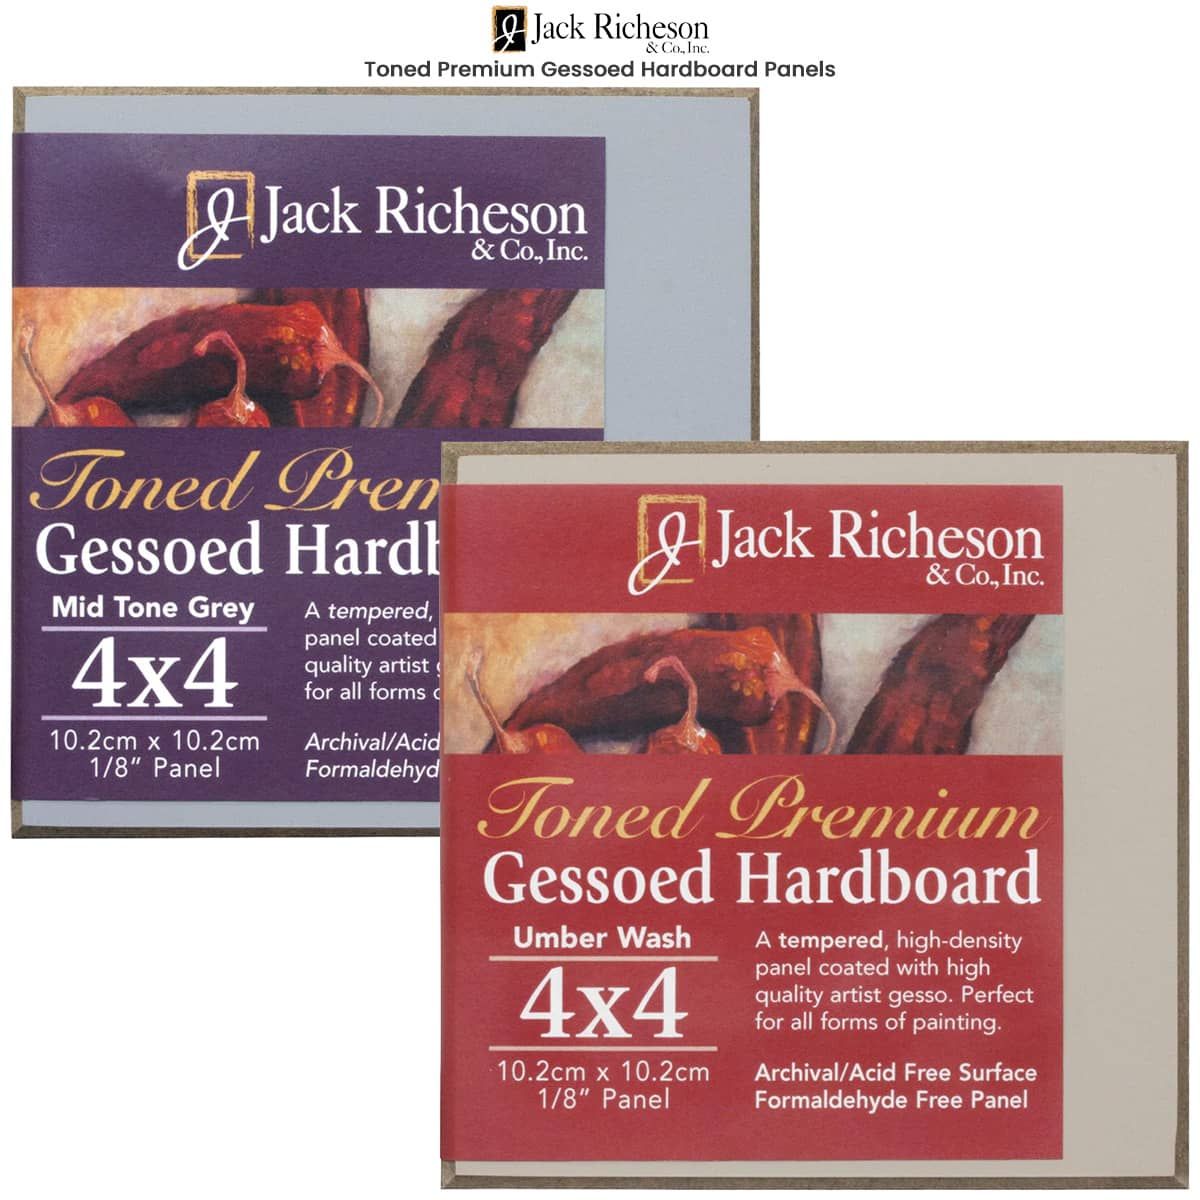 Jack Richeson Drawing Board 23 x 26 – Guiry's